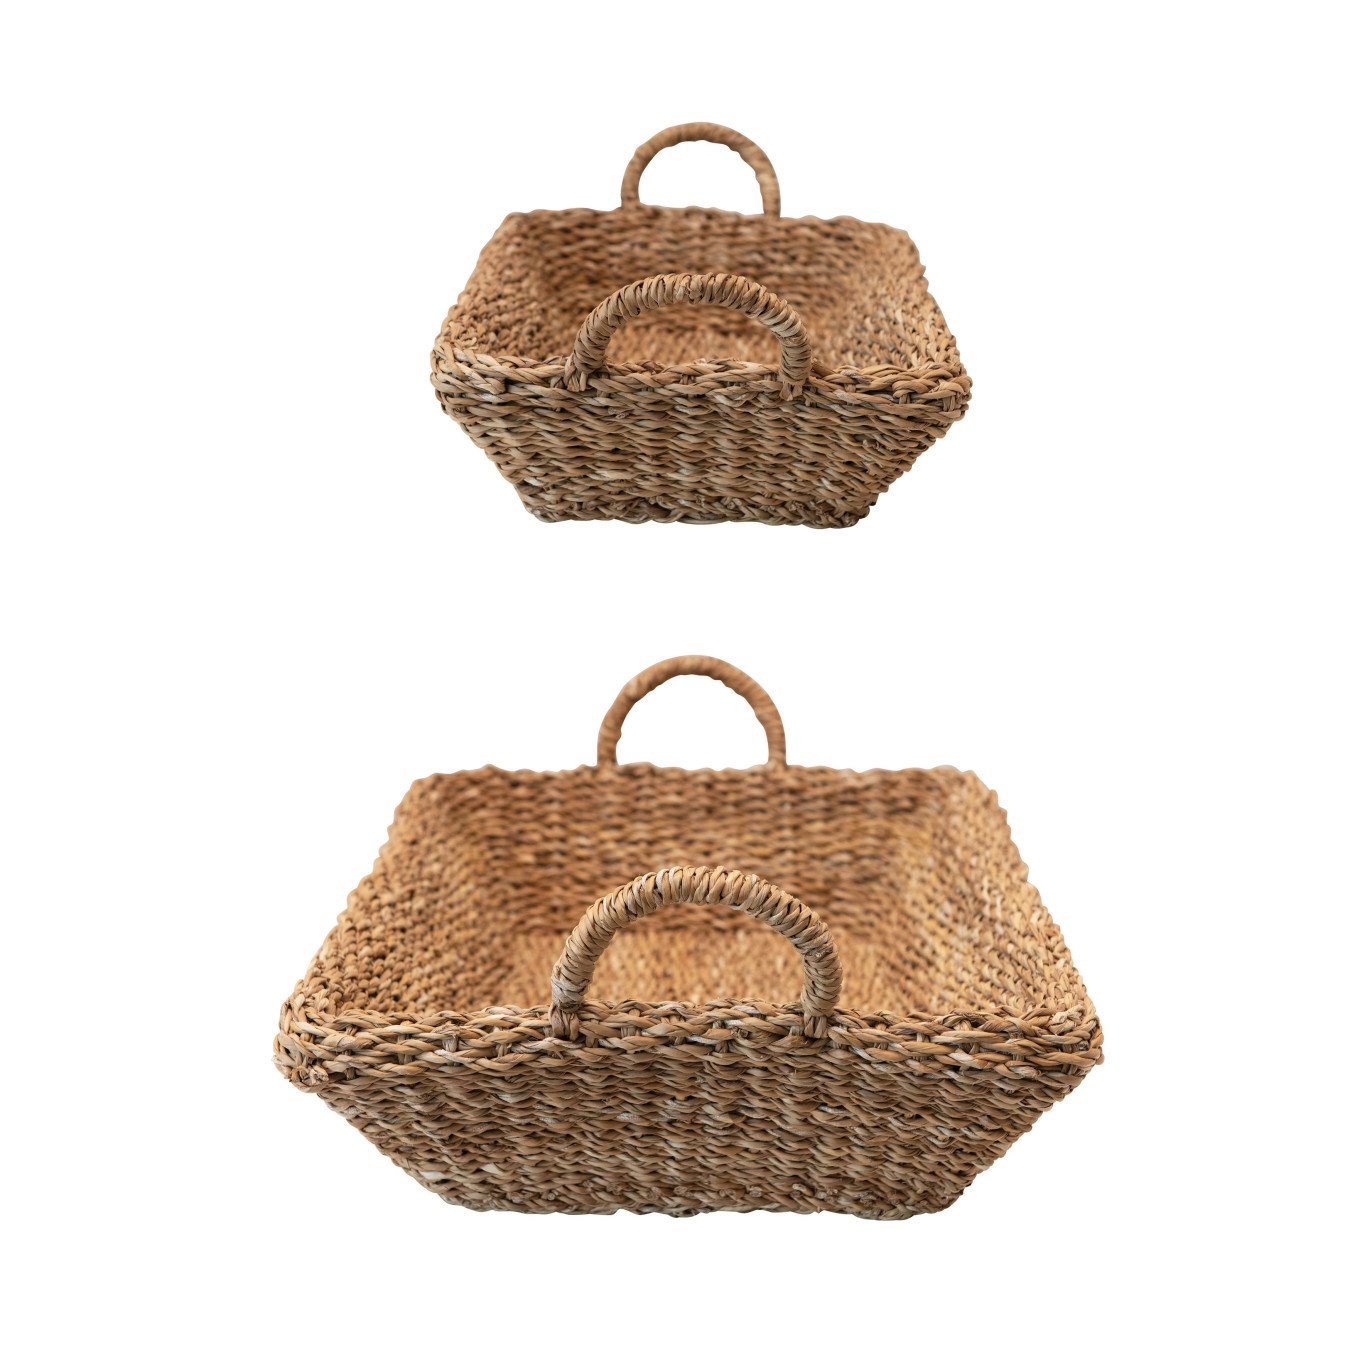 Decorative Hand-Woven Seagrass Double Walled Trays With Handles, Natural, Set of 2